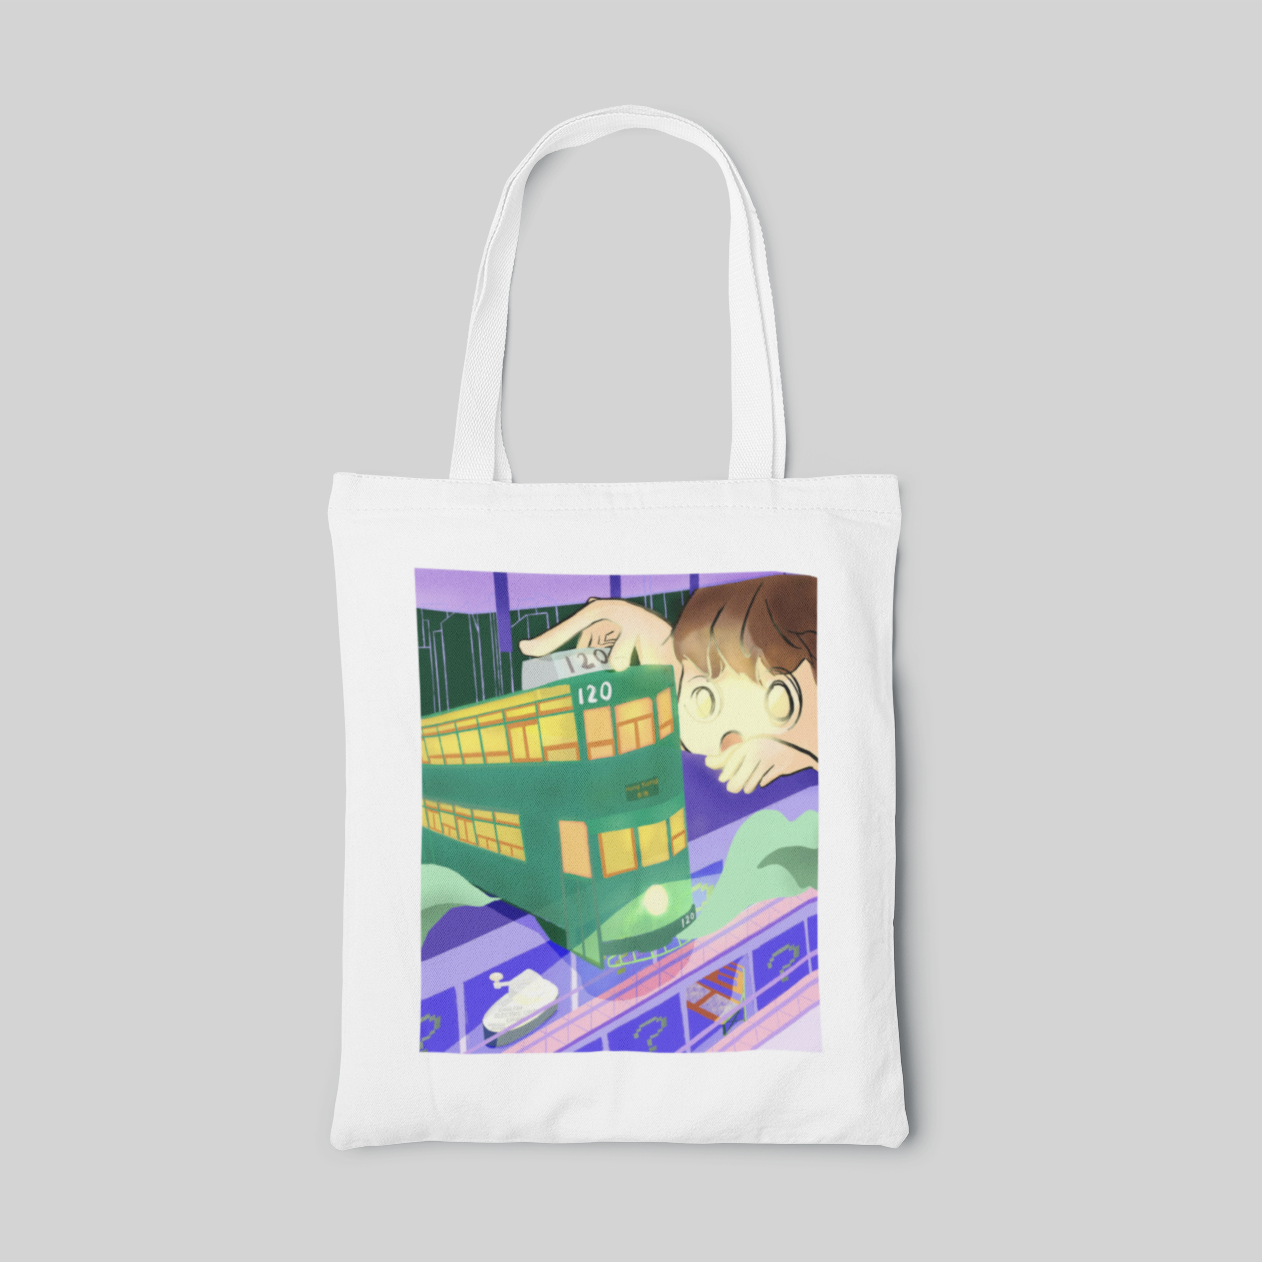 urban white designed tote bag with a girl touching the tram No.120 in a purple and green background, front side